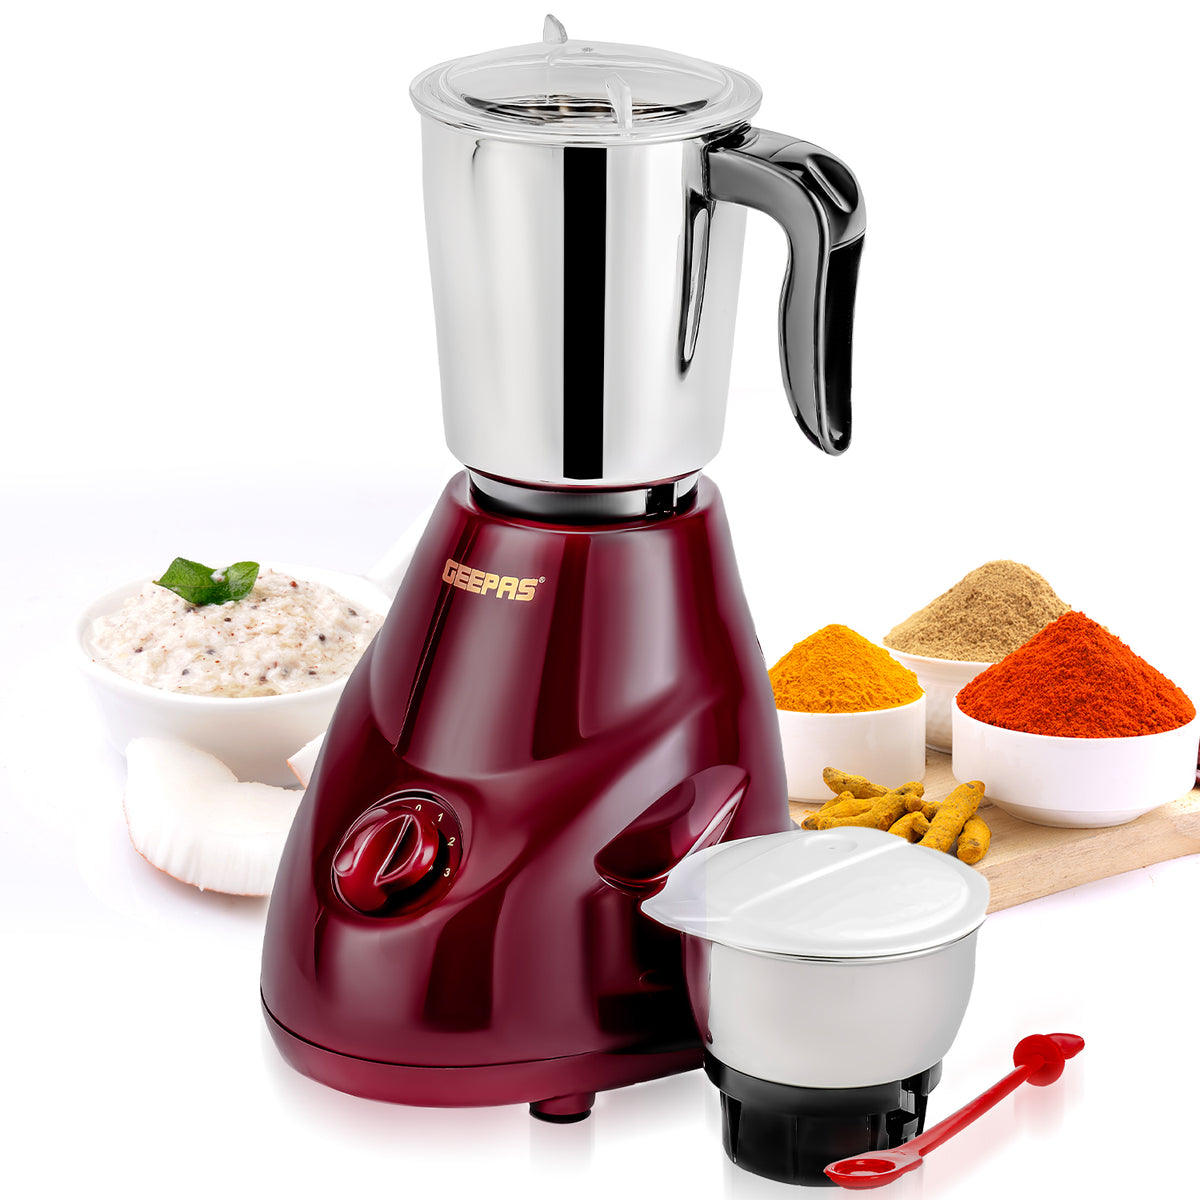 2-In-1 Multifunctional Wet and Dry Indian Mixer Grinder 550W